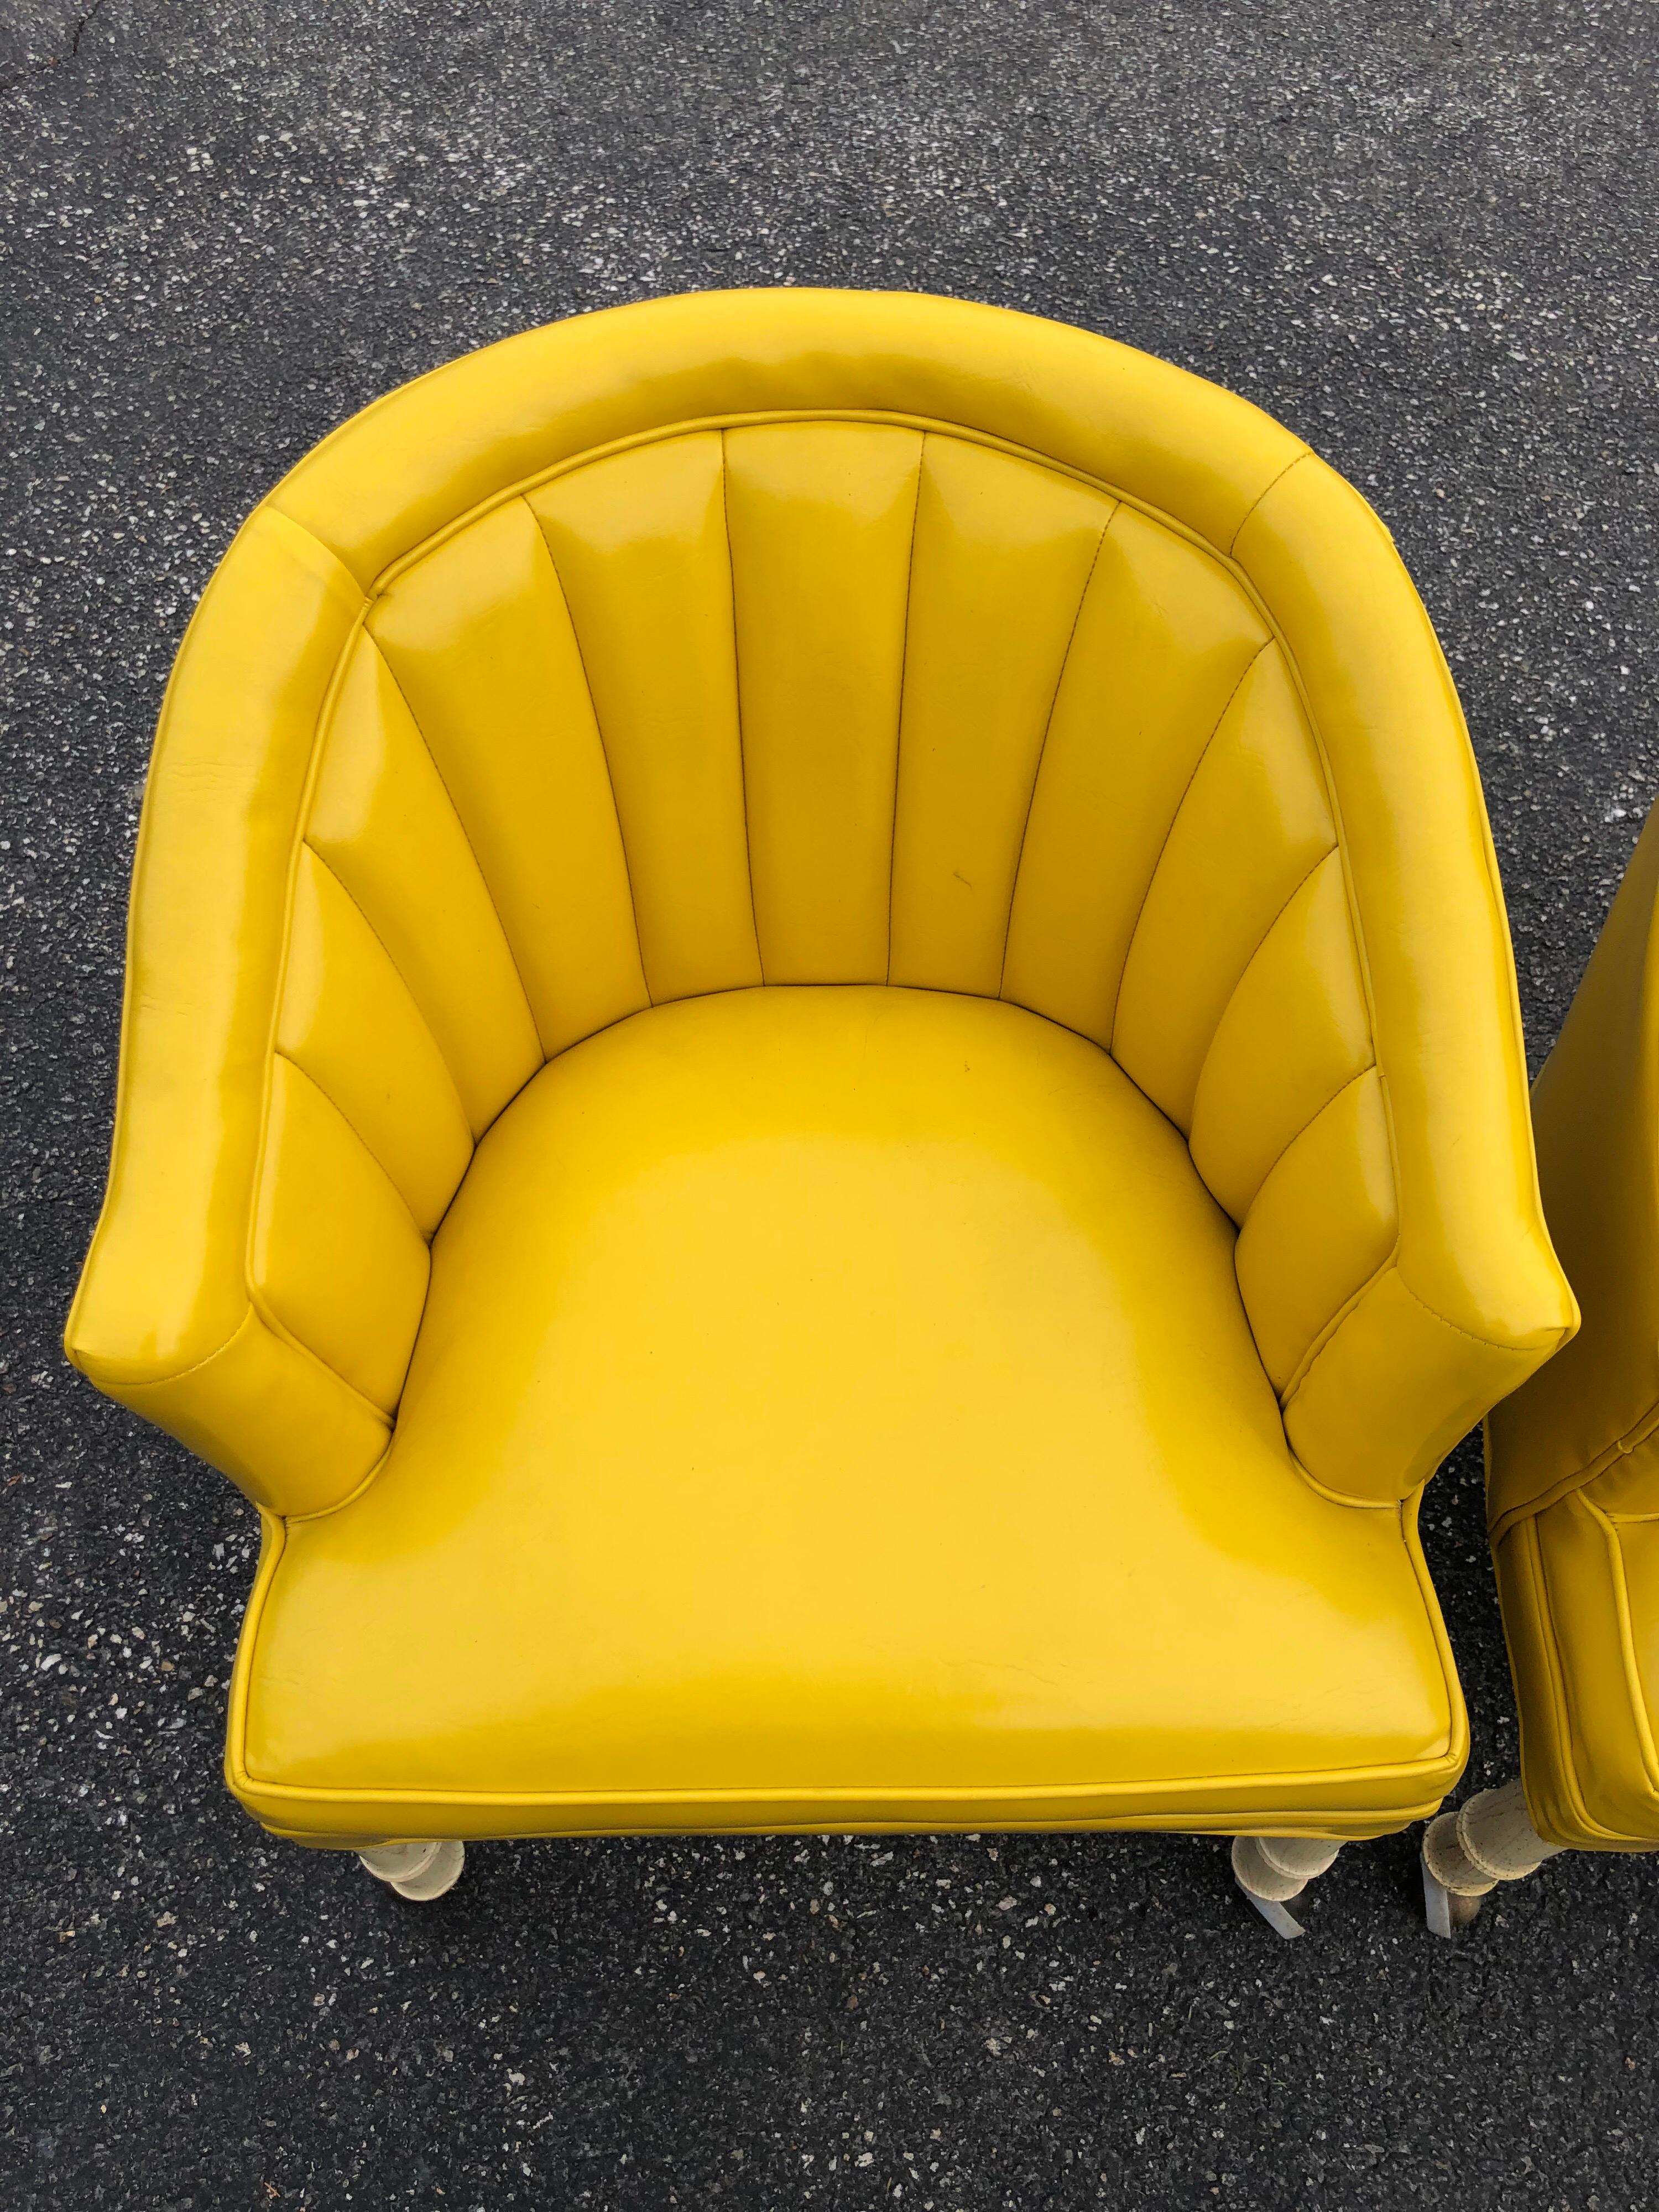 Late 20th Century Pair of Bright Yellow Channel Back Chairs on Castors